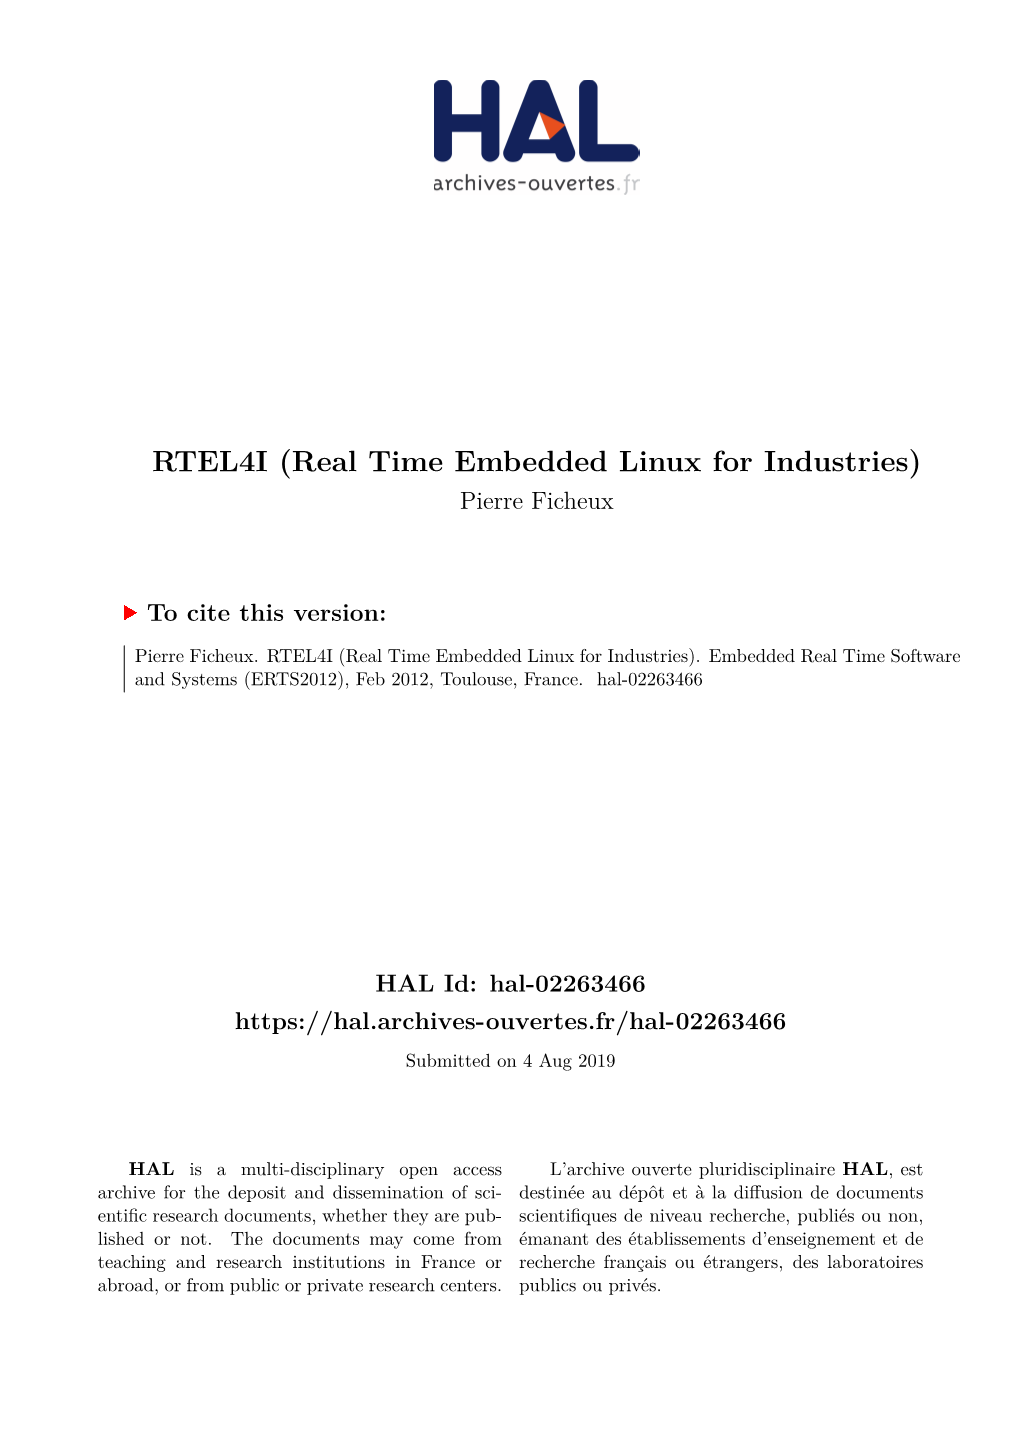 Real Time Embedded Linux for Industries) Pierre Ficheux